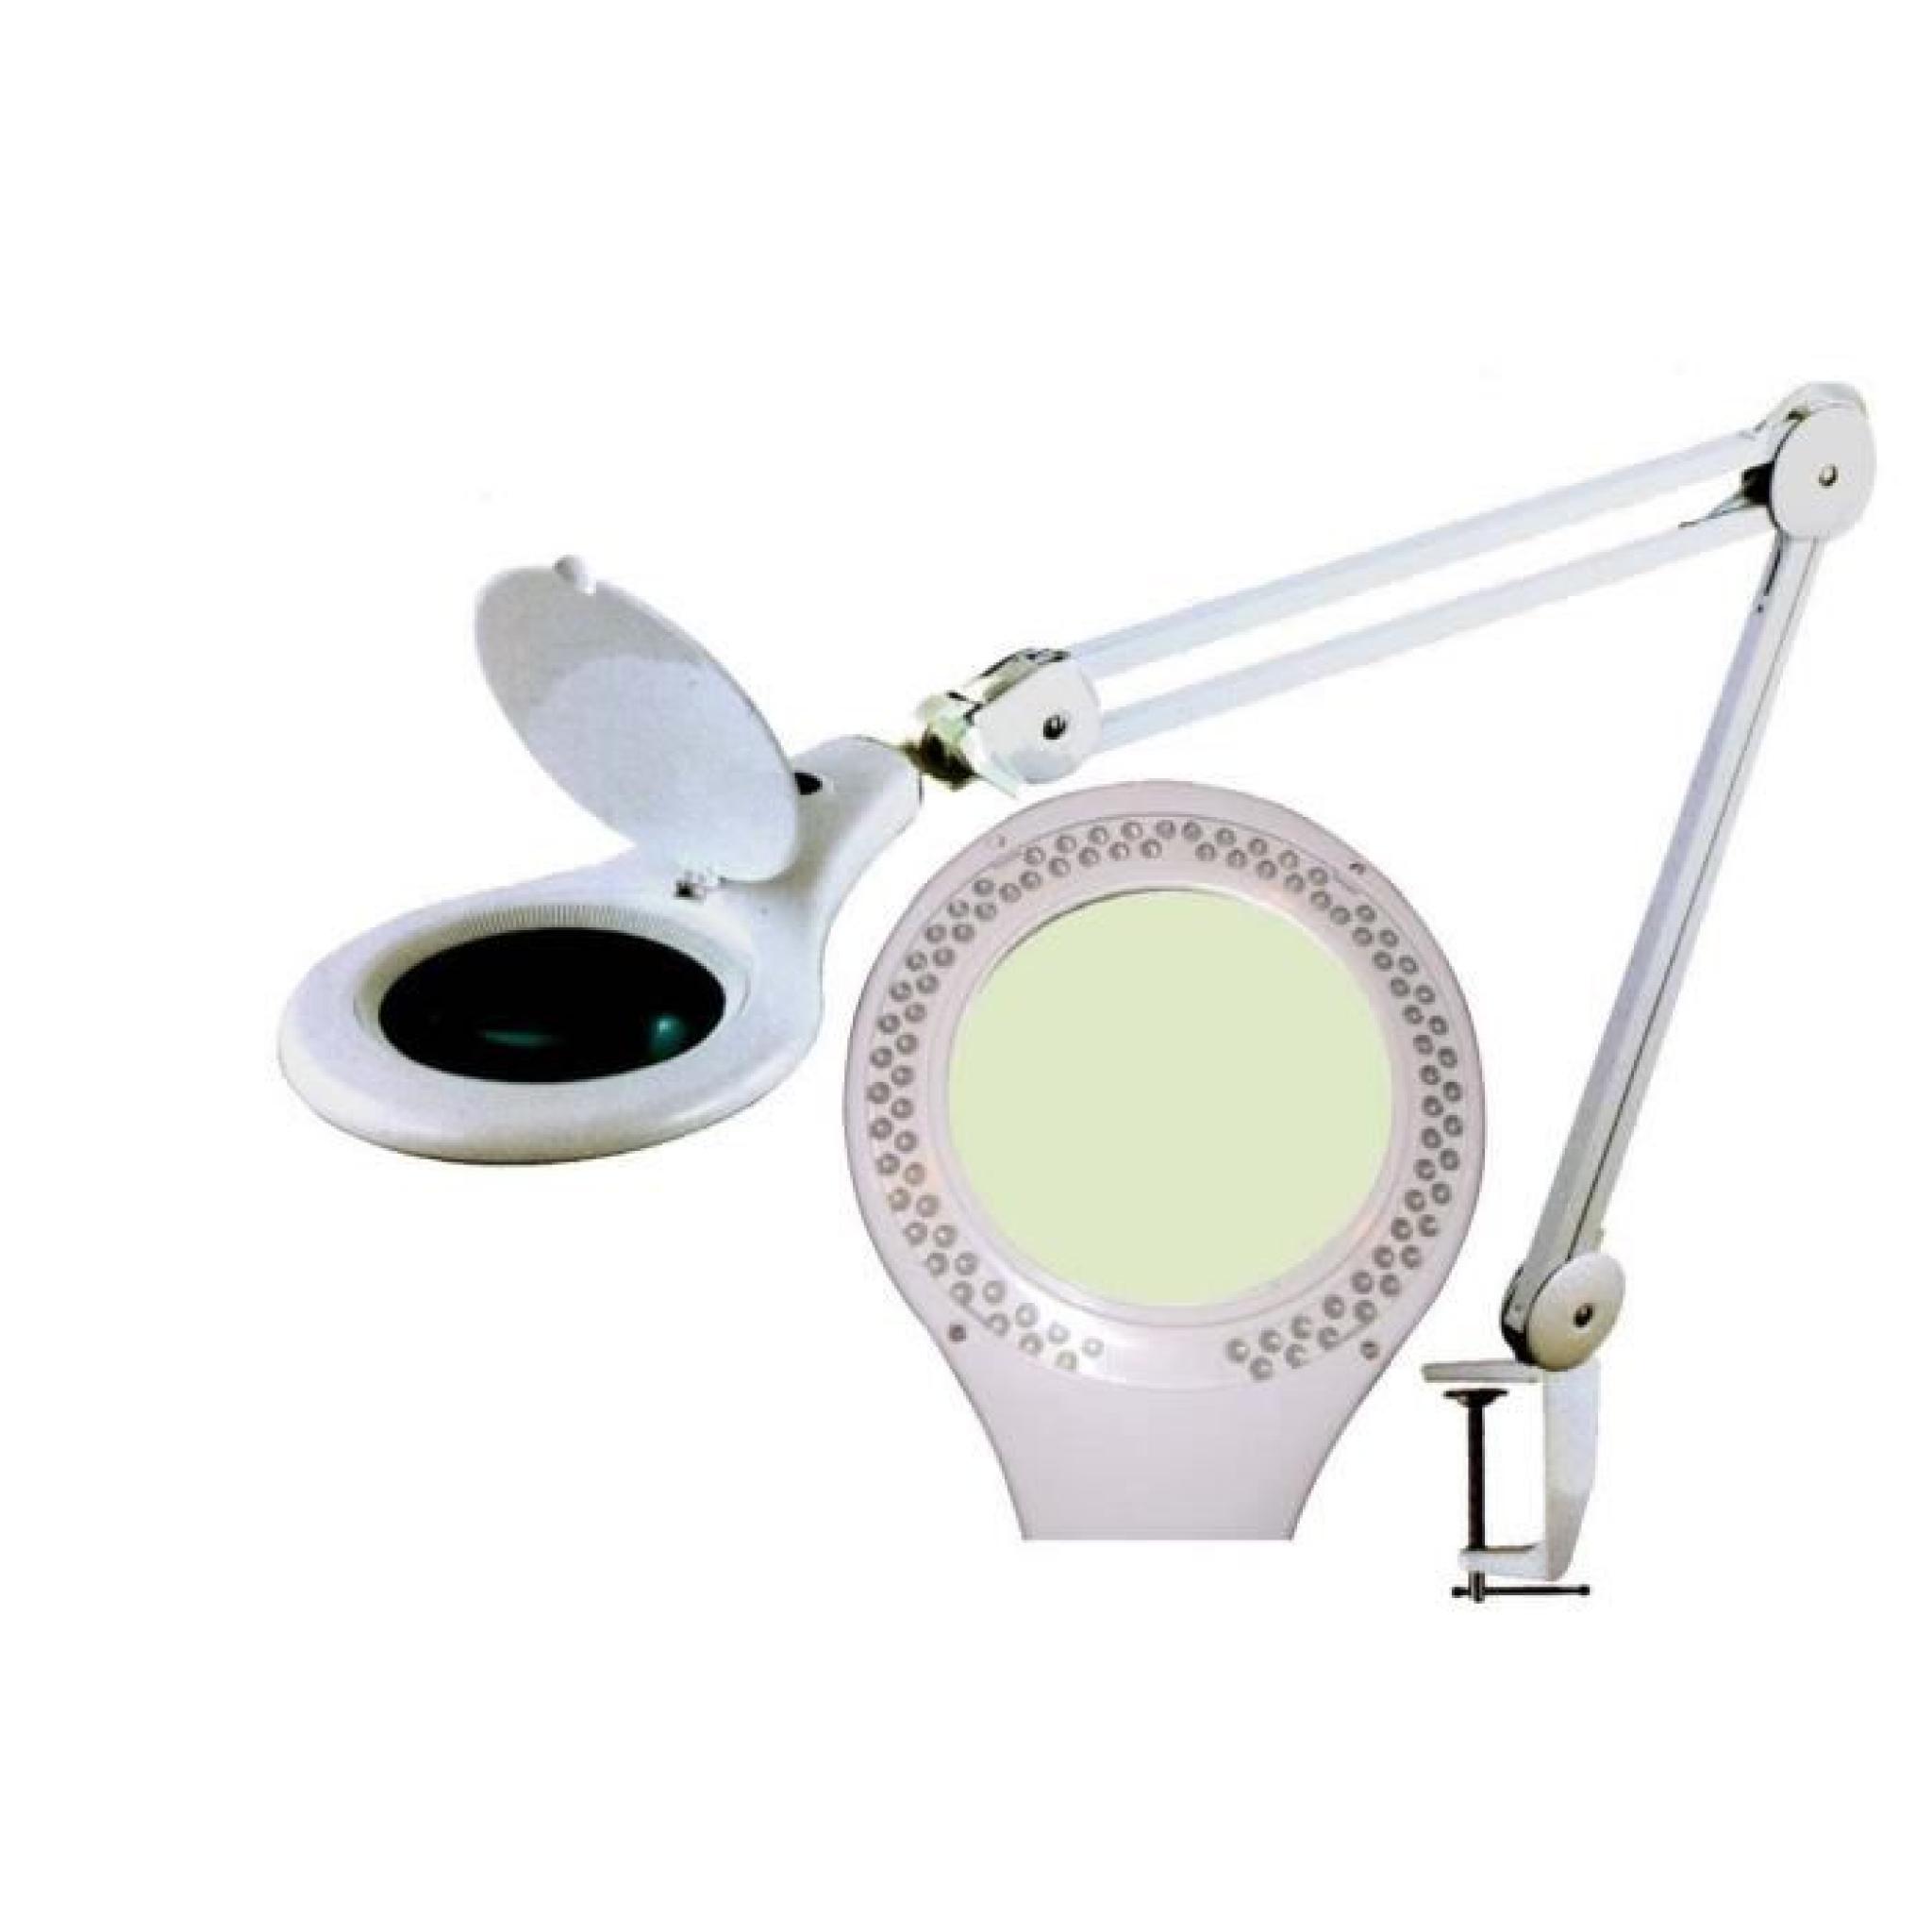 LAMPE LOUPE DE TABLE 90 LED 5 DIOPTRIES